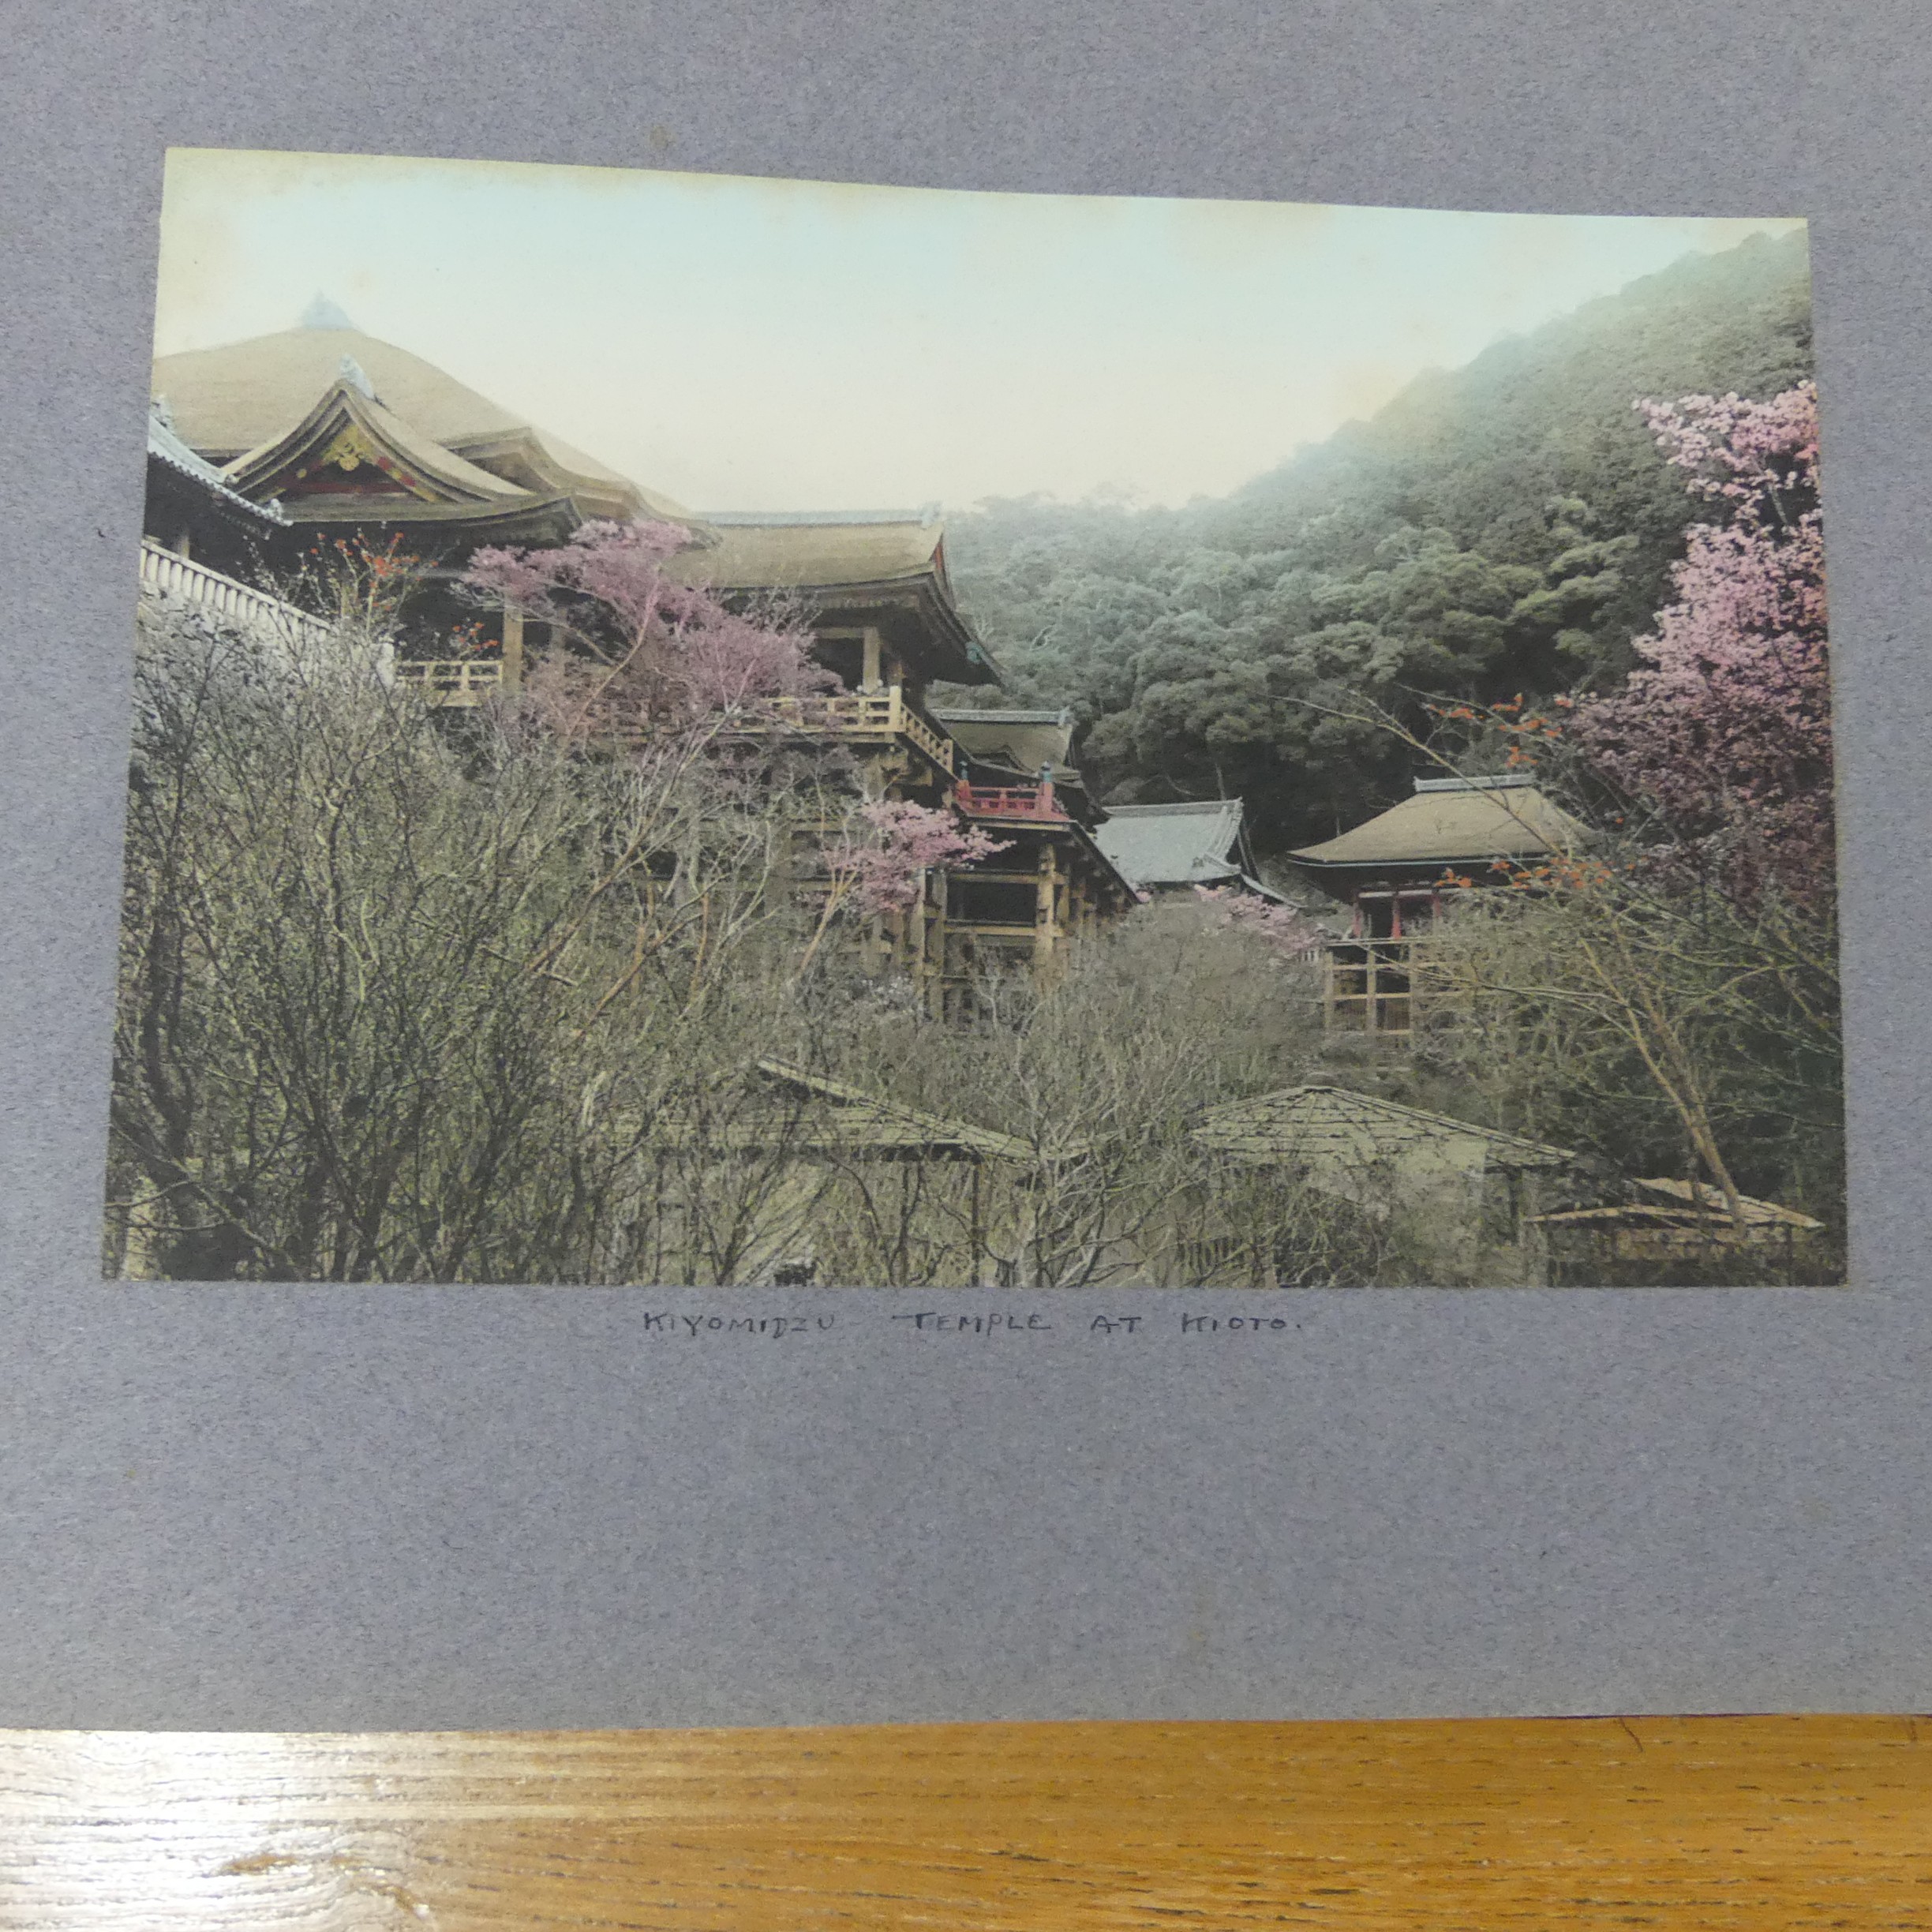 An album of early 20th century Japanese tinted photographs, depicting places, rural scenes, - Image 5 of 7